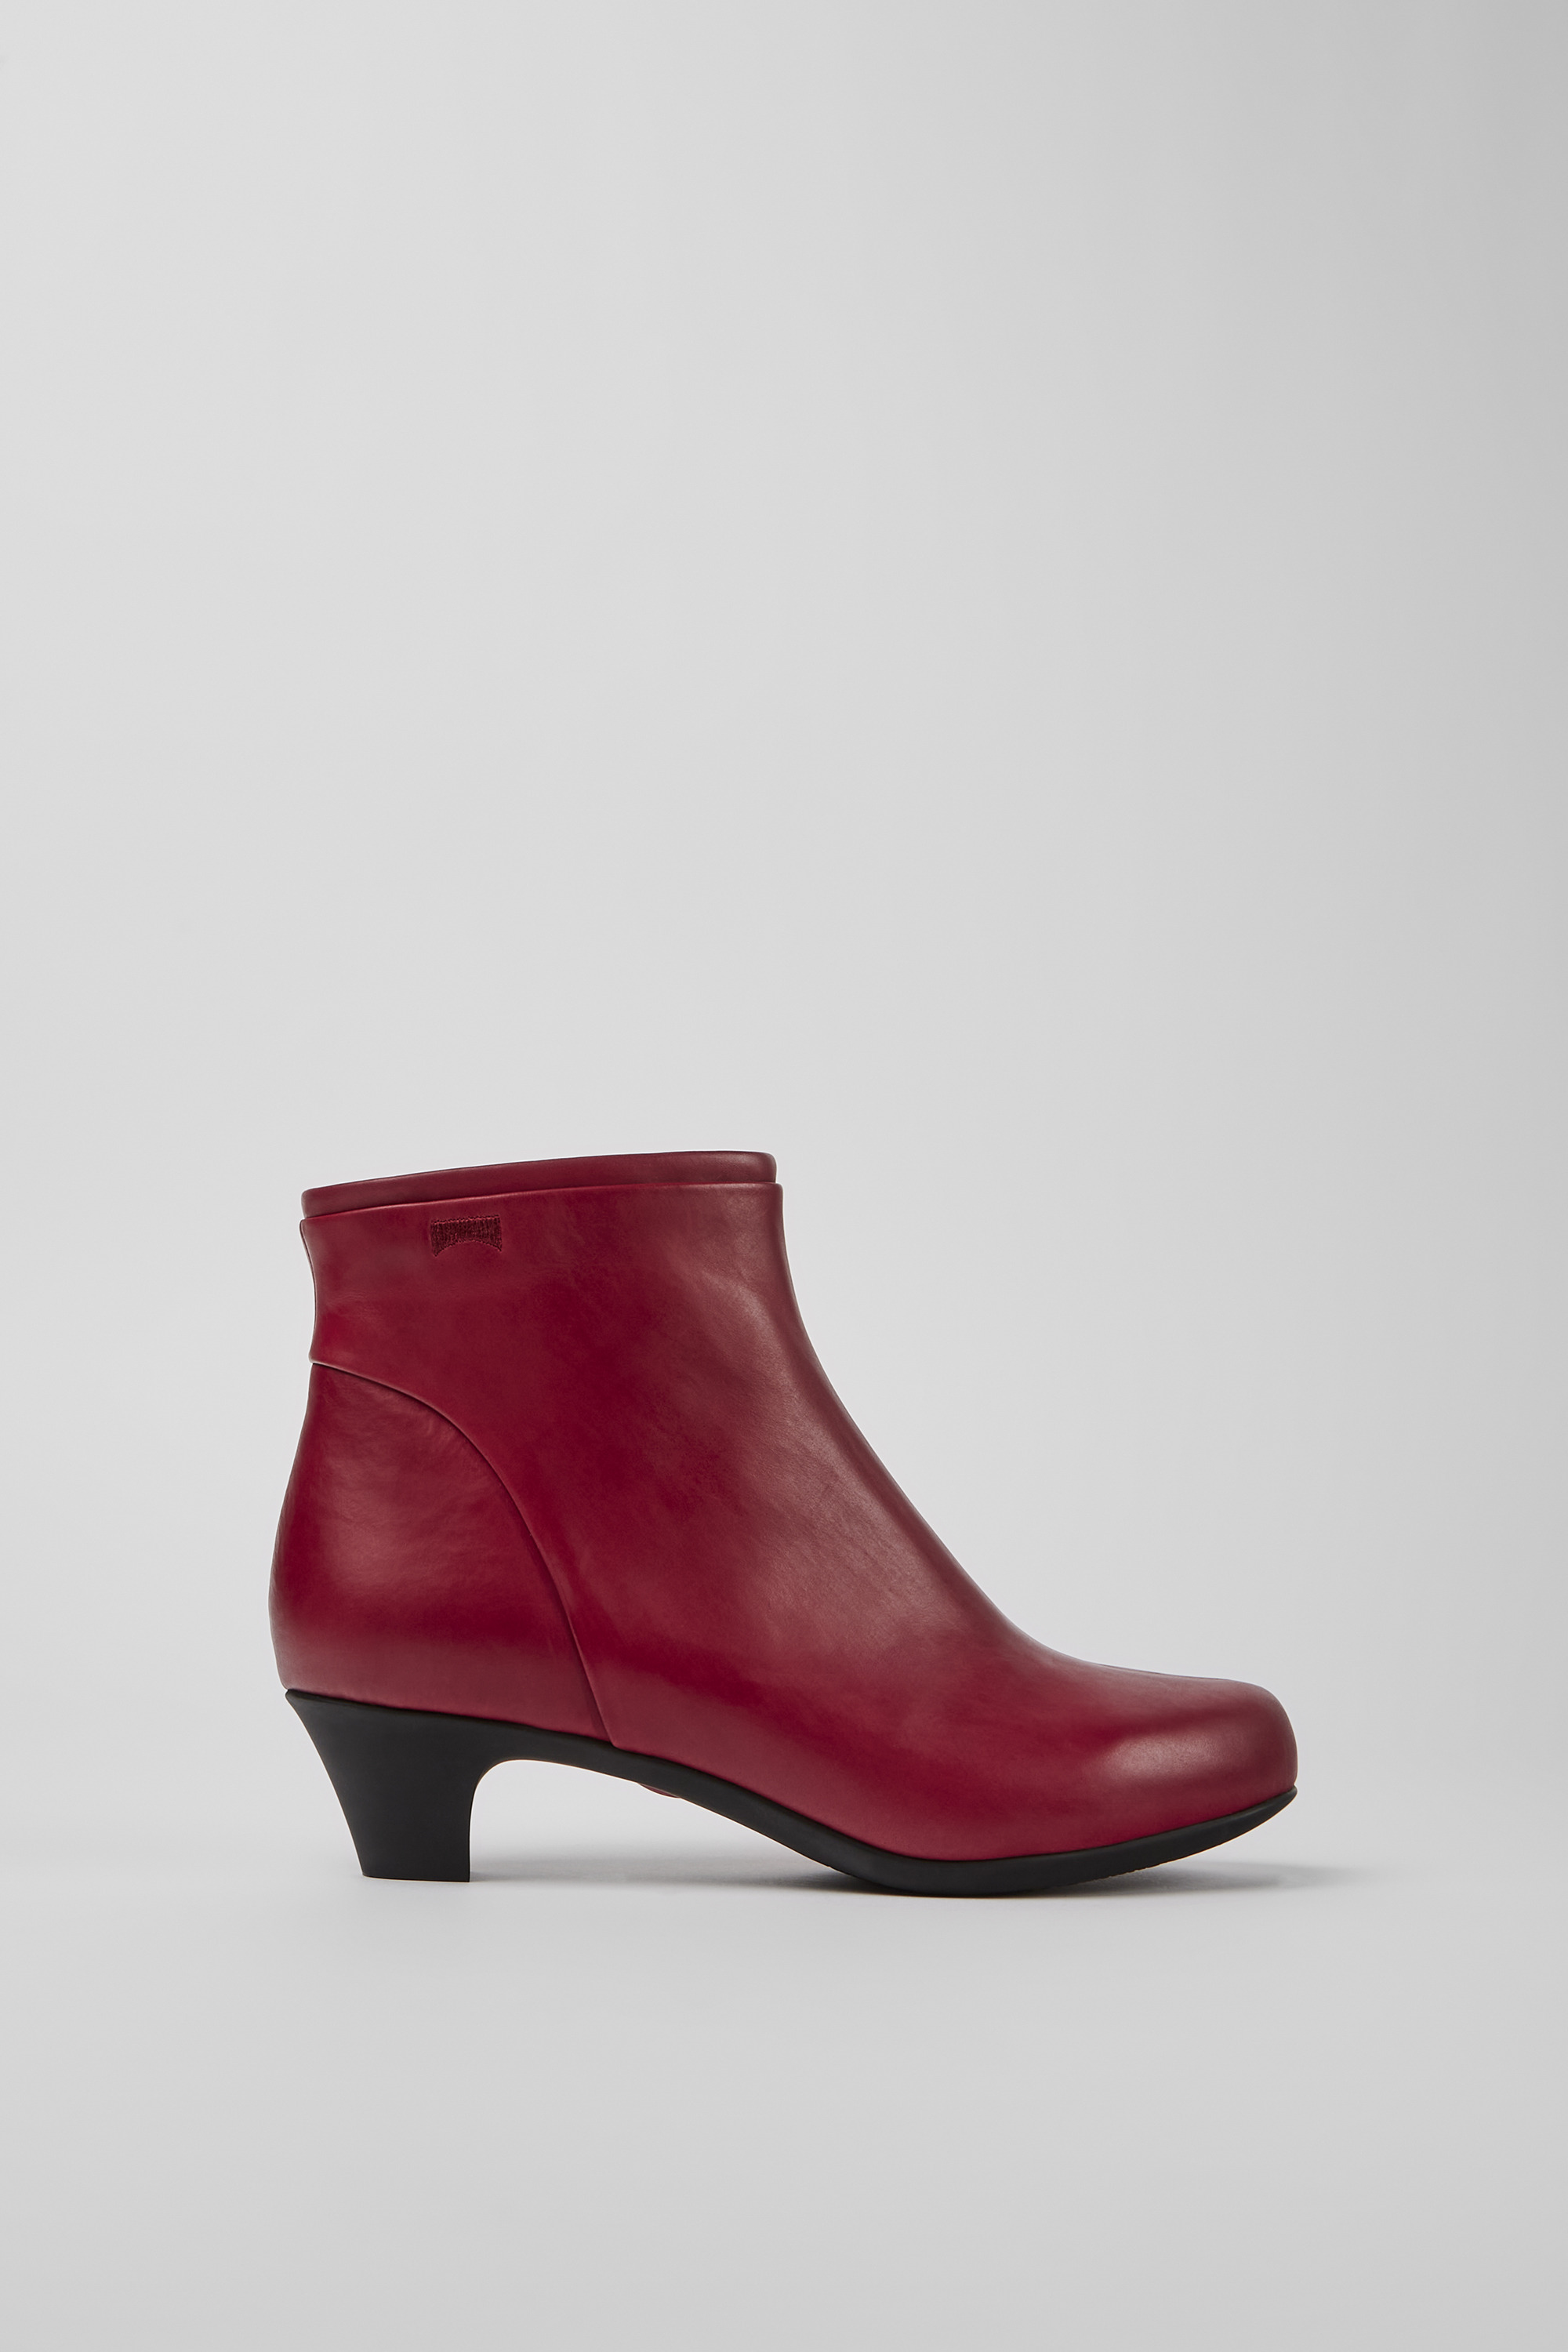 Ankle Boots Women - Spring/Summer collection - Paraguay